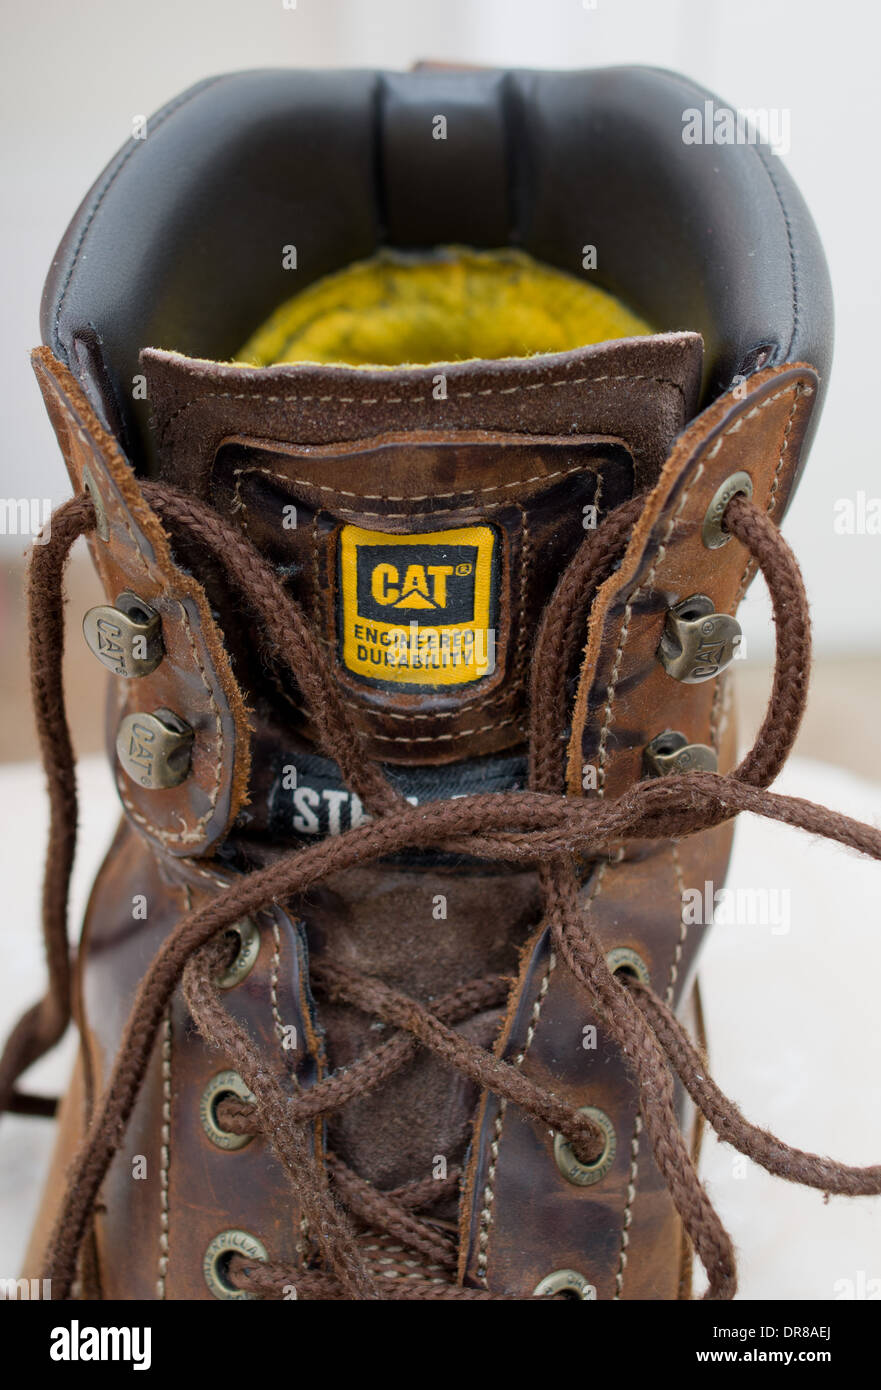 safety shoe boot close up detail Stock Photo